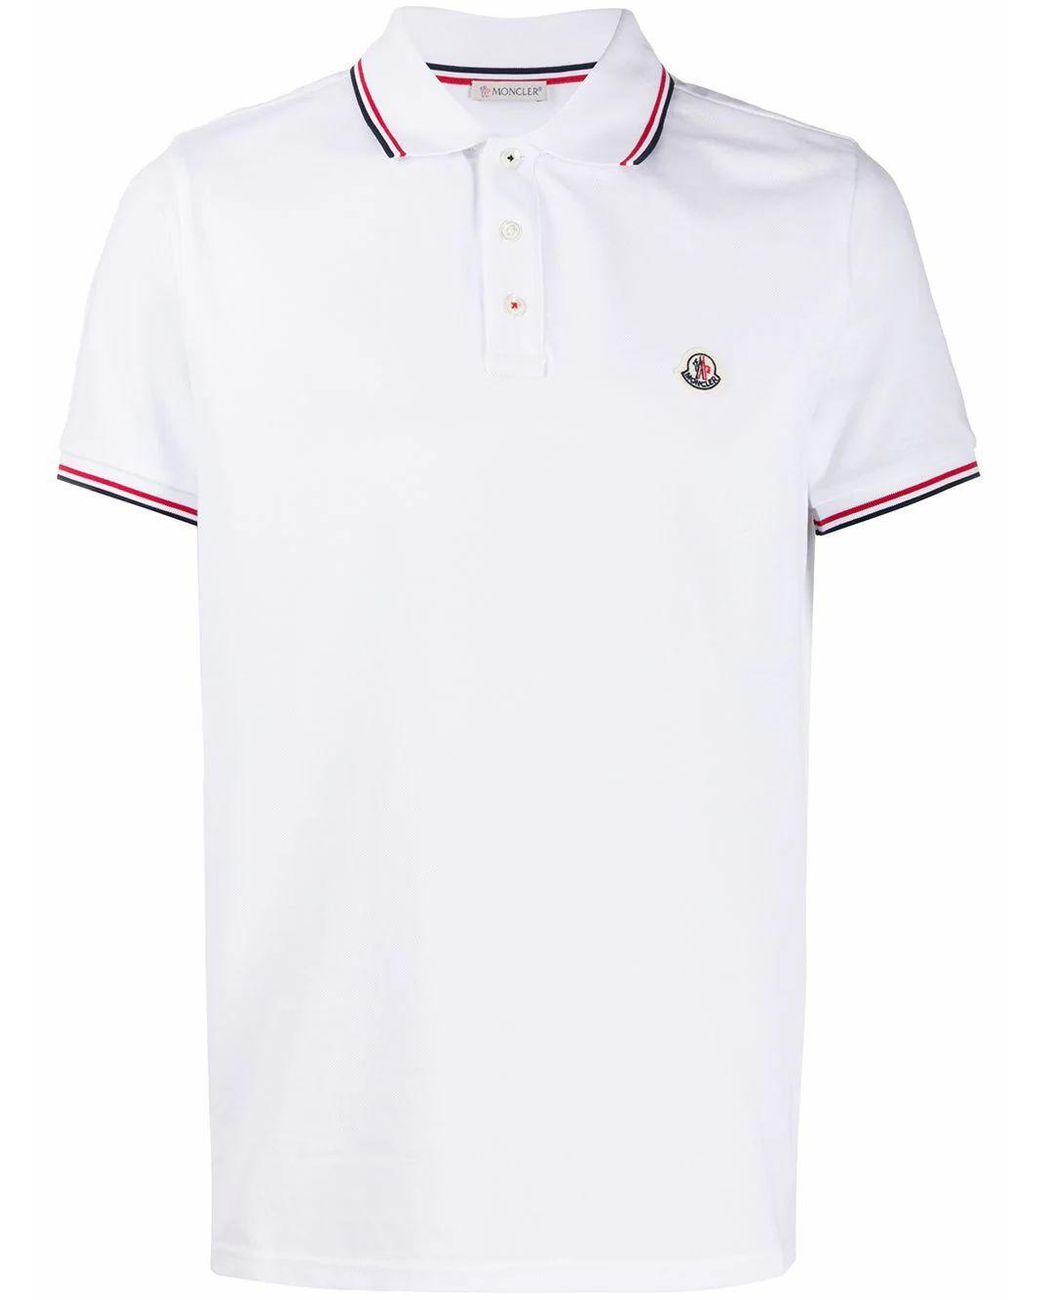 Moncler Cotton Polo Shirt in White for Men - Lyst